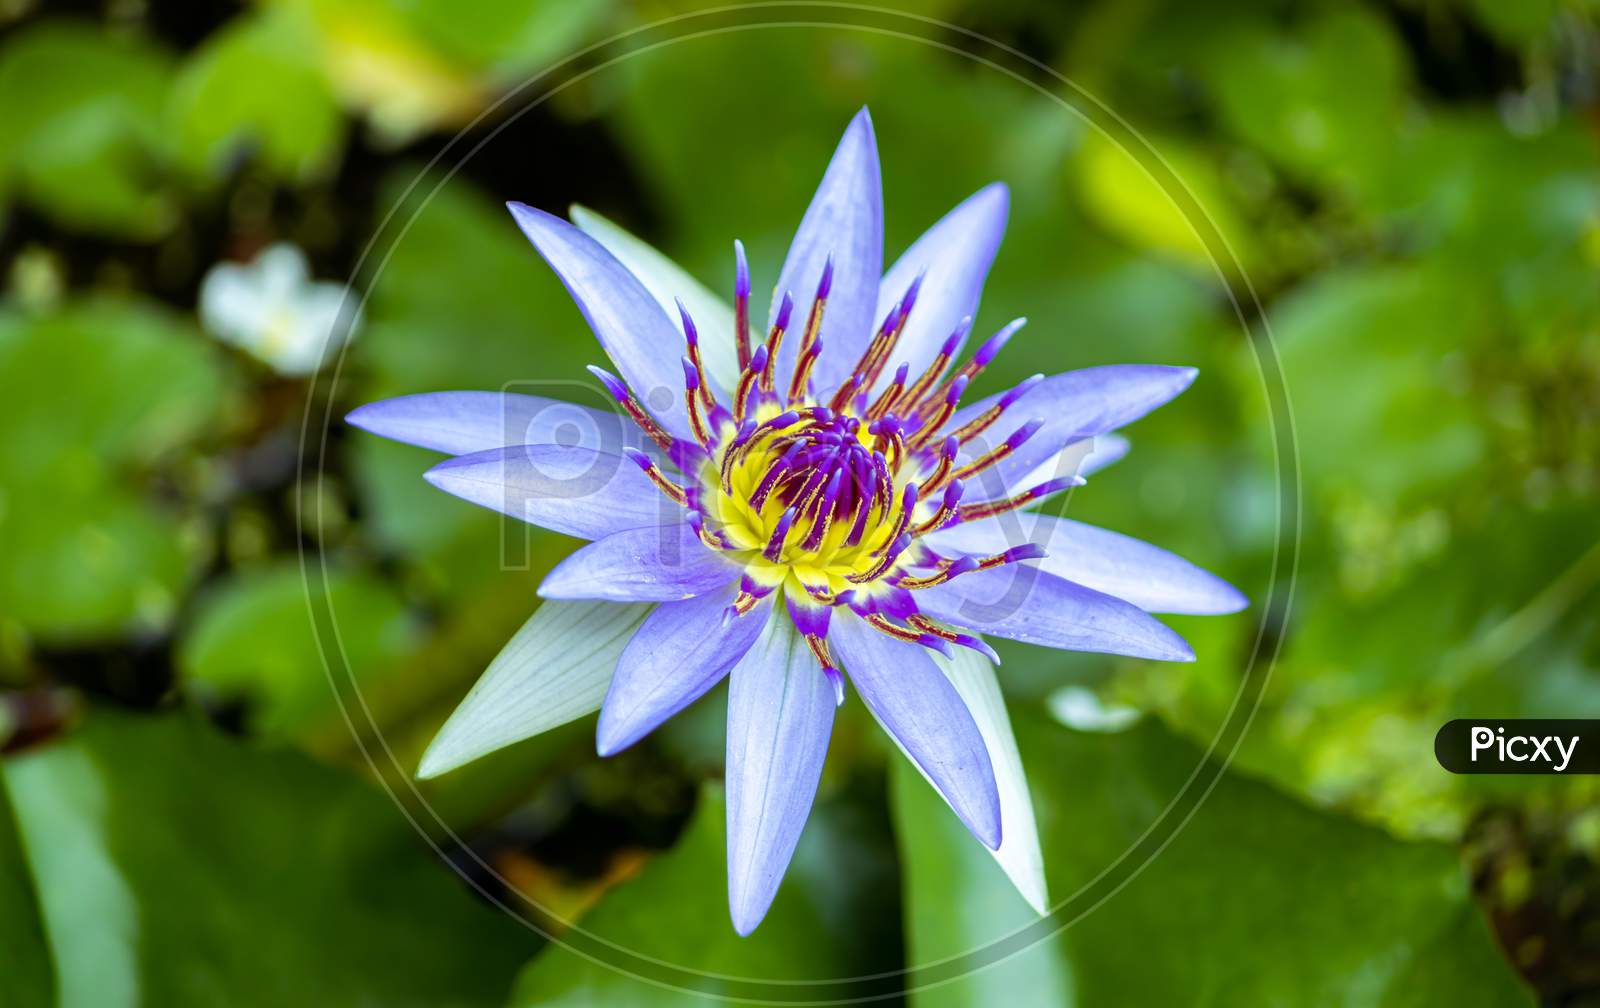 Blue Lotus Flower Rises Above The Water Level And Blooms In The Morning, Garden Pond.